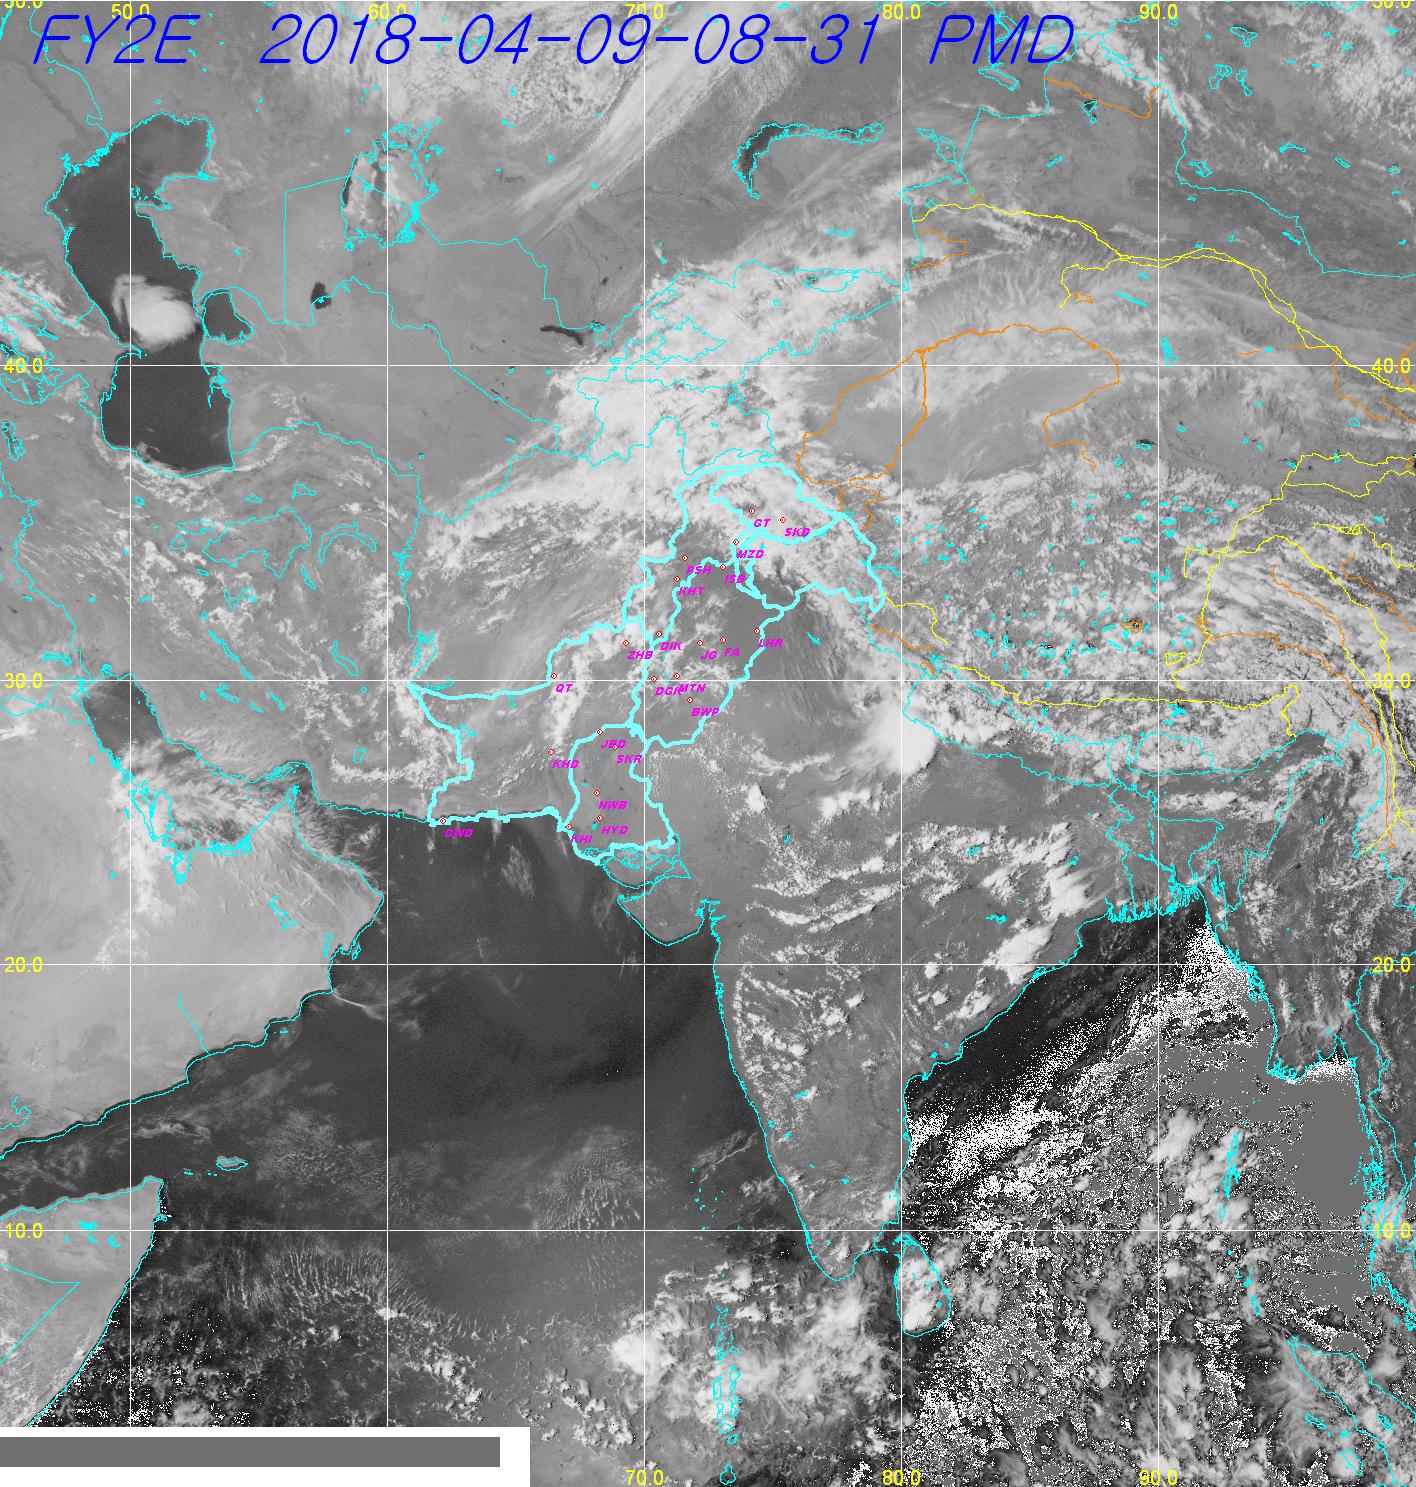 Latest Satellite Imagery – The Pakistan's Weather Channel